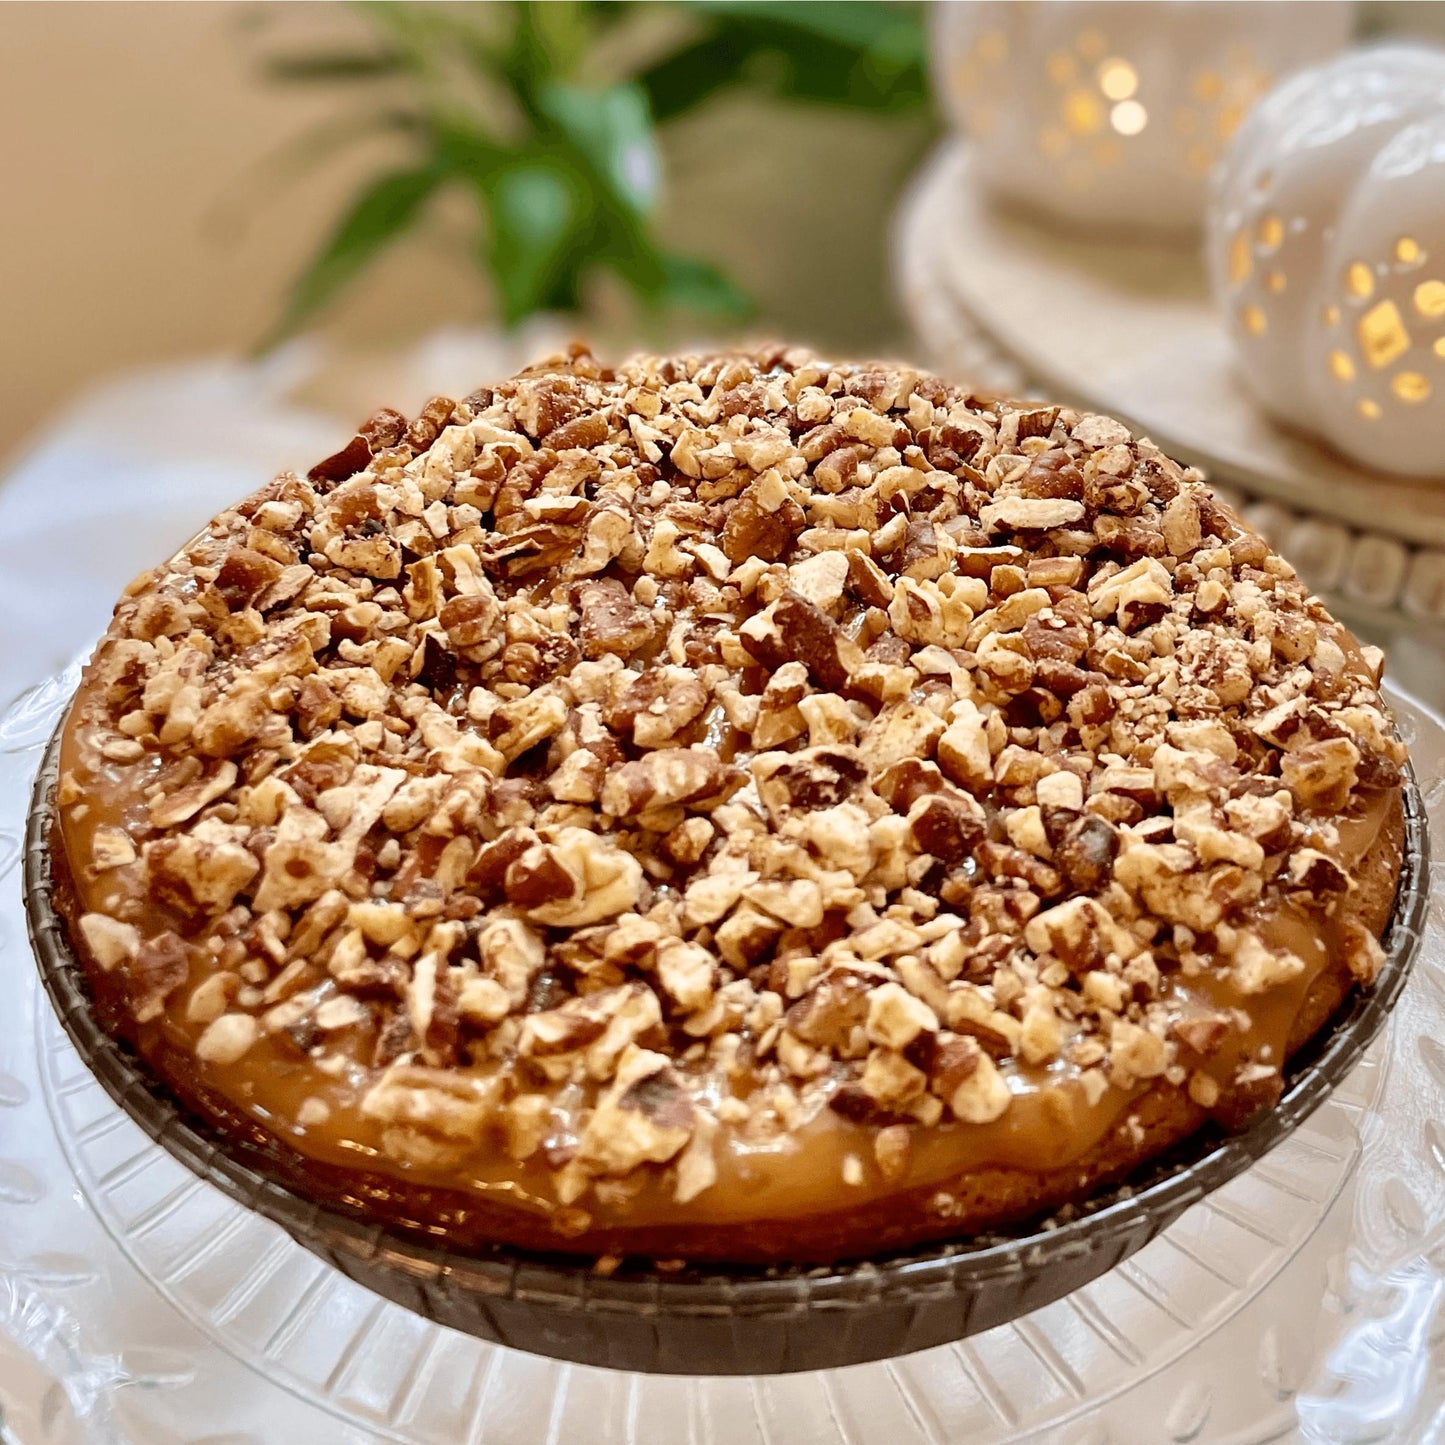 
                  
                    Gluten-free, sugar-free, dairy-free Carrot Pecan Full Life Cake topped with sugar-free caramel syrup and toasted chopped pecans, featuring sweet organic carrots and rich cinnamon for a moist, delicious slice.Full Life Gourmet Bakery
                  
                